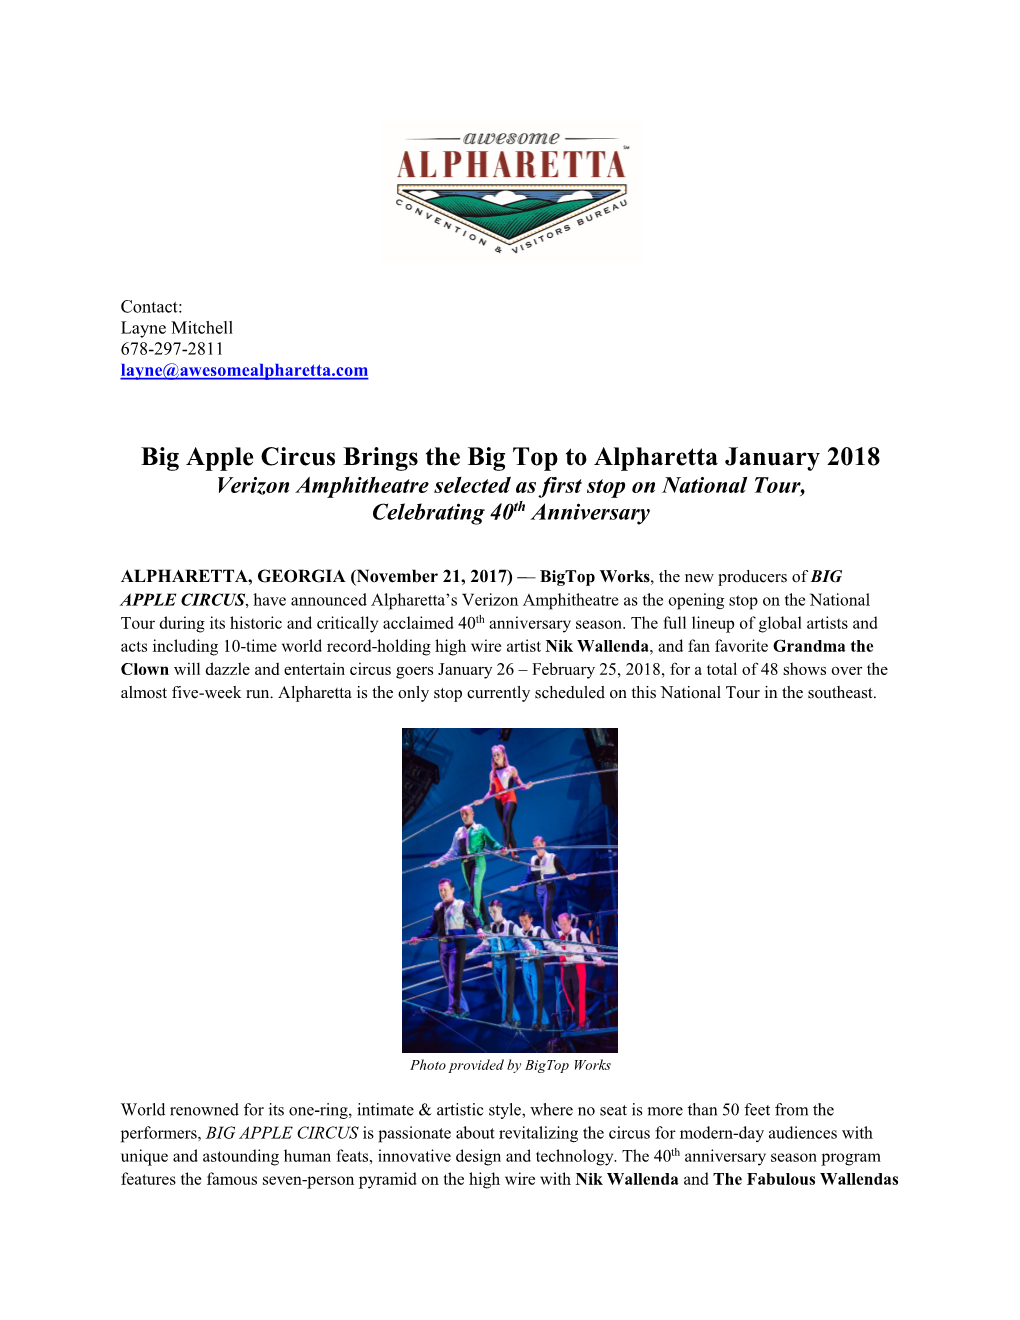 Big Apple Circus Brings the Big Top to Alpharetta January 2018 Verizon Amphitheatre Selected As First Stop on National Tour, Celebrating 40Th Anniversary